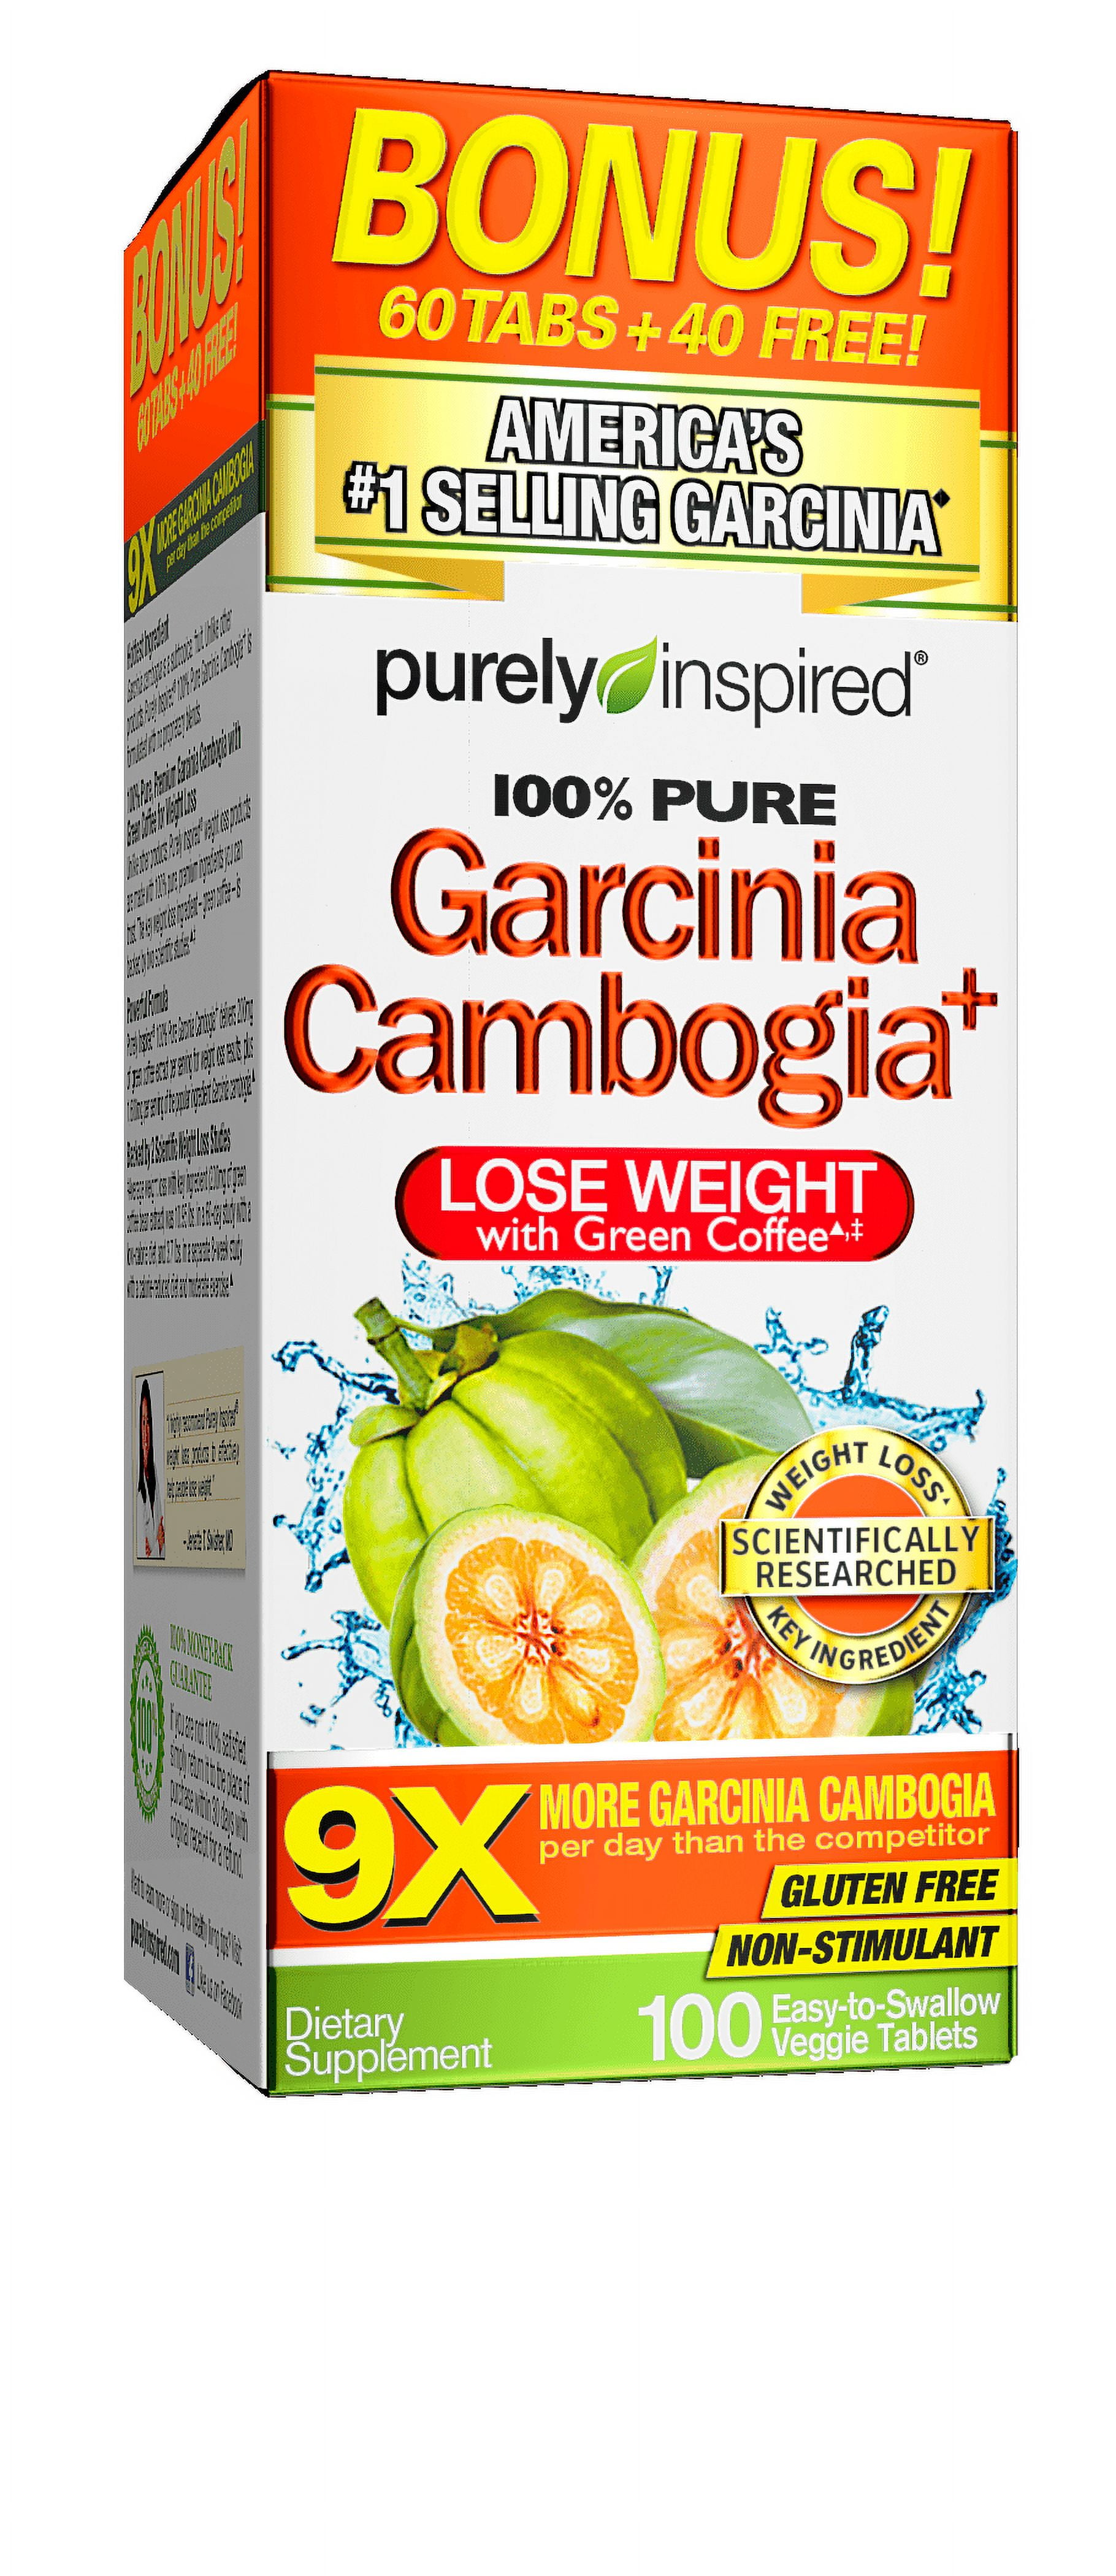 The Truth About Garcinia Cambogia and Weight Loss